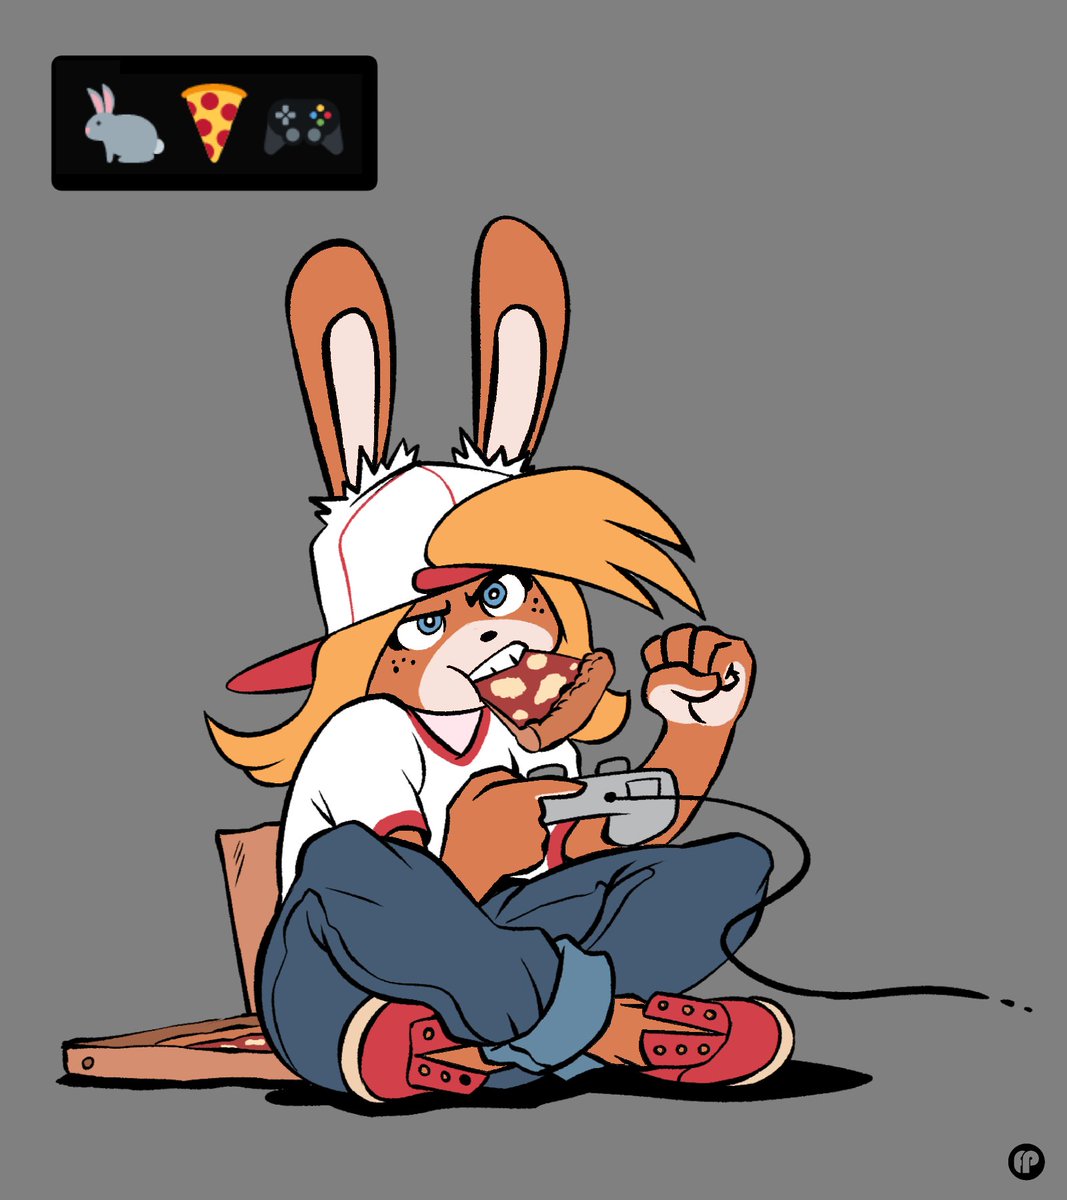 「Not even pizza stops the gamer bunbun to」|⛽️ FPVのイラスト